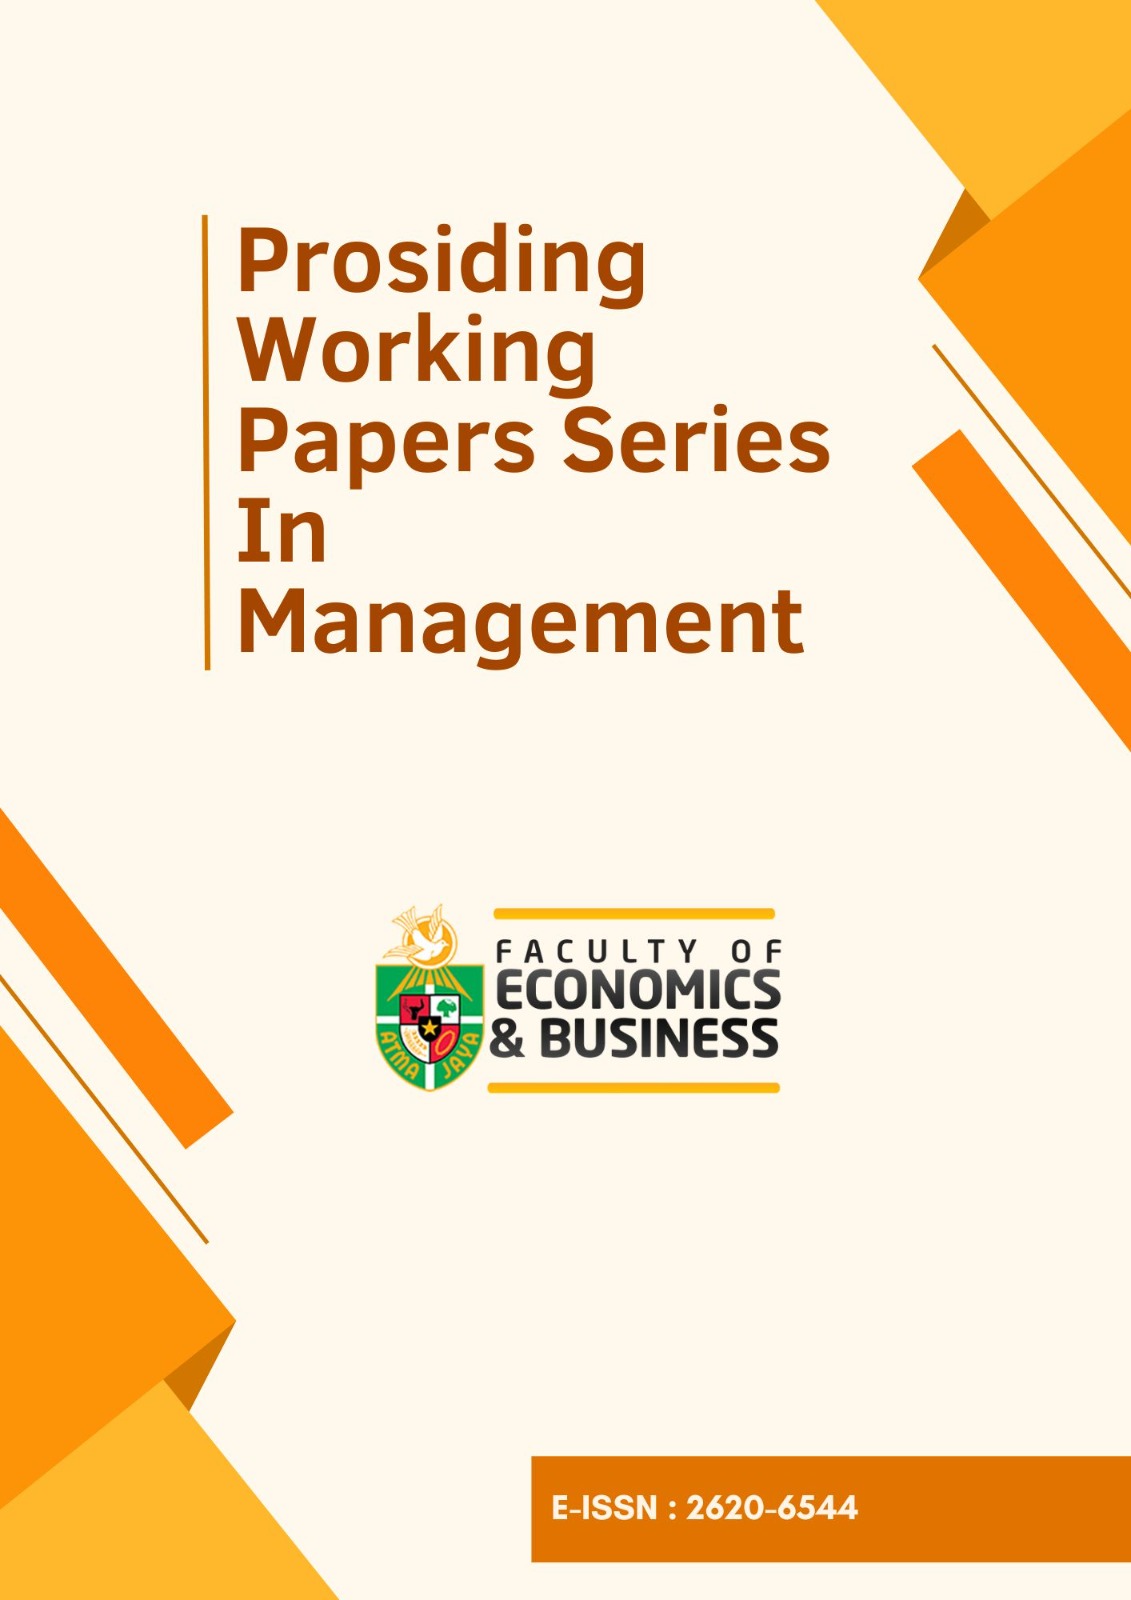 Prosiding Working Papers Series In Management